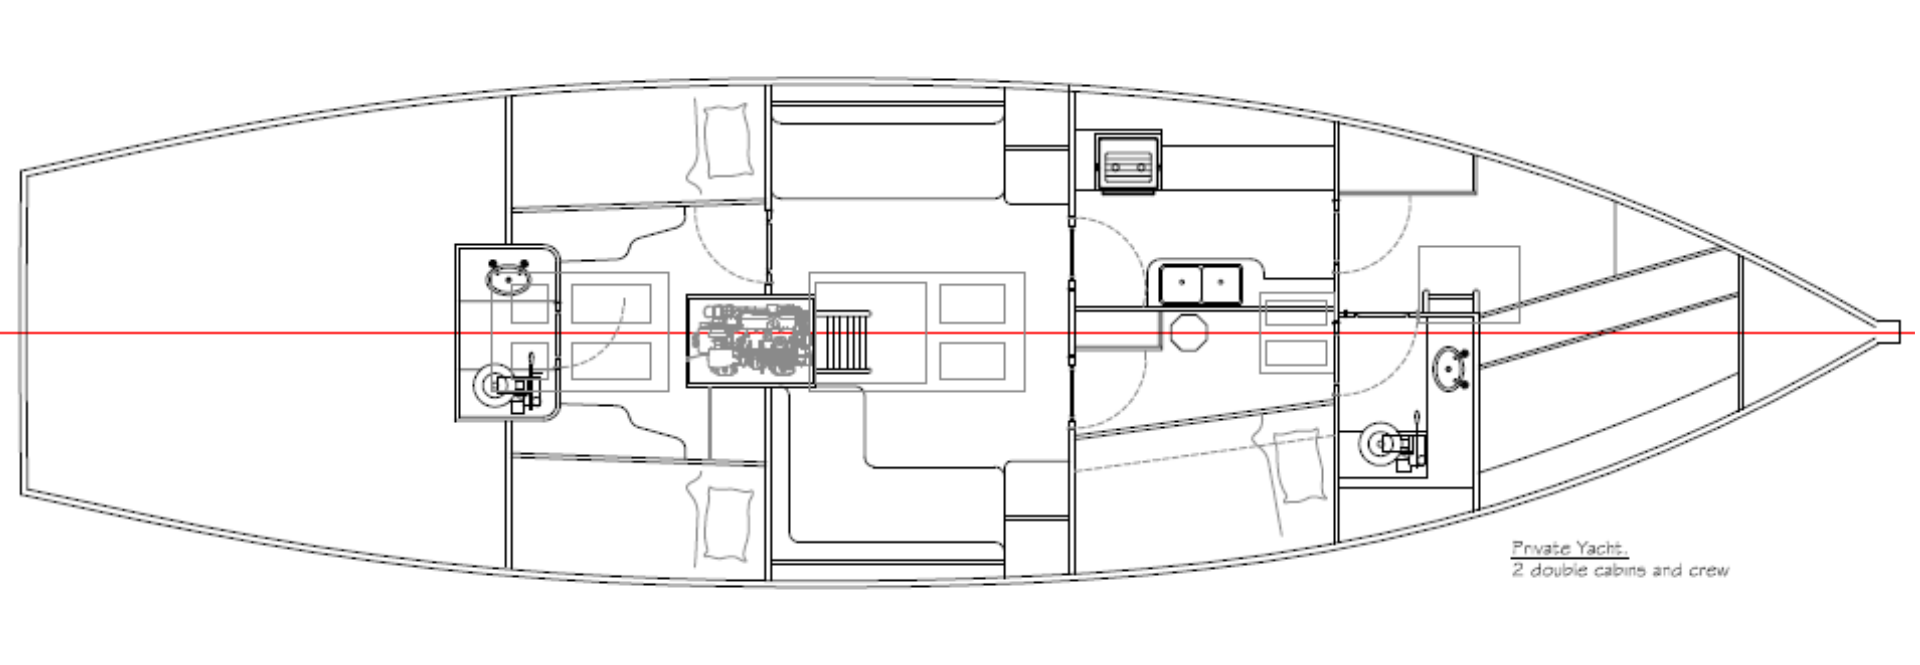 Proposed-Alternative-Layout-PrivateYacht-1920x665.png